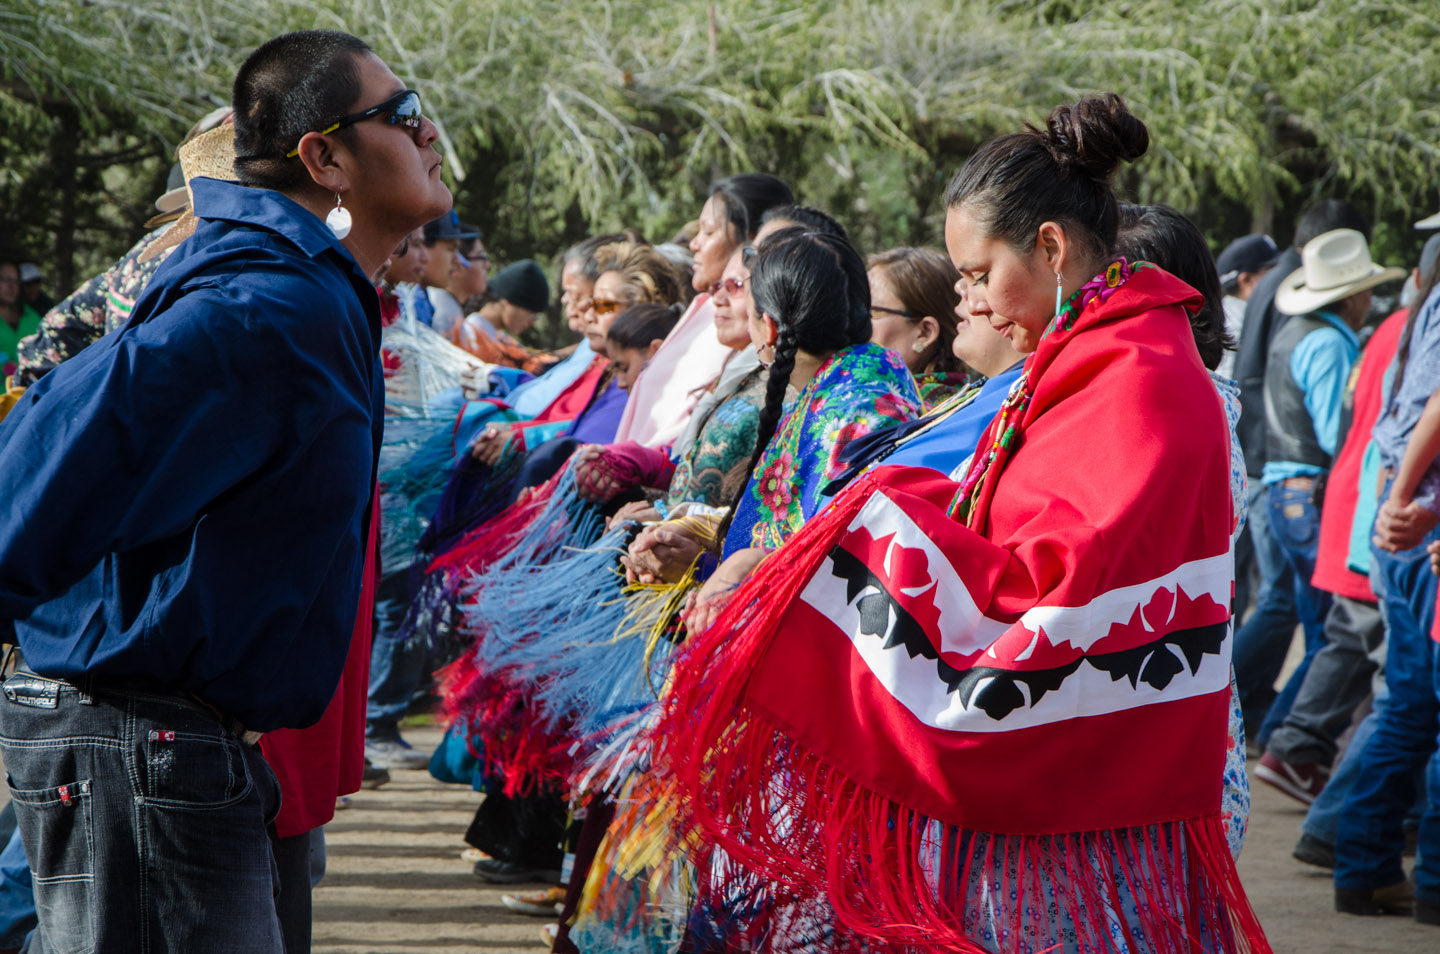 Filling the Bear Dance Corral, couples line dance in a synchronized rhythm, accentuated by the colorful fringes adorning the women’s traditional shawls.